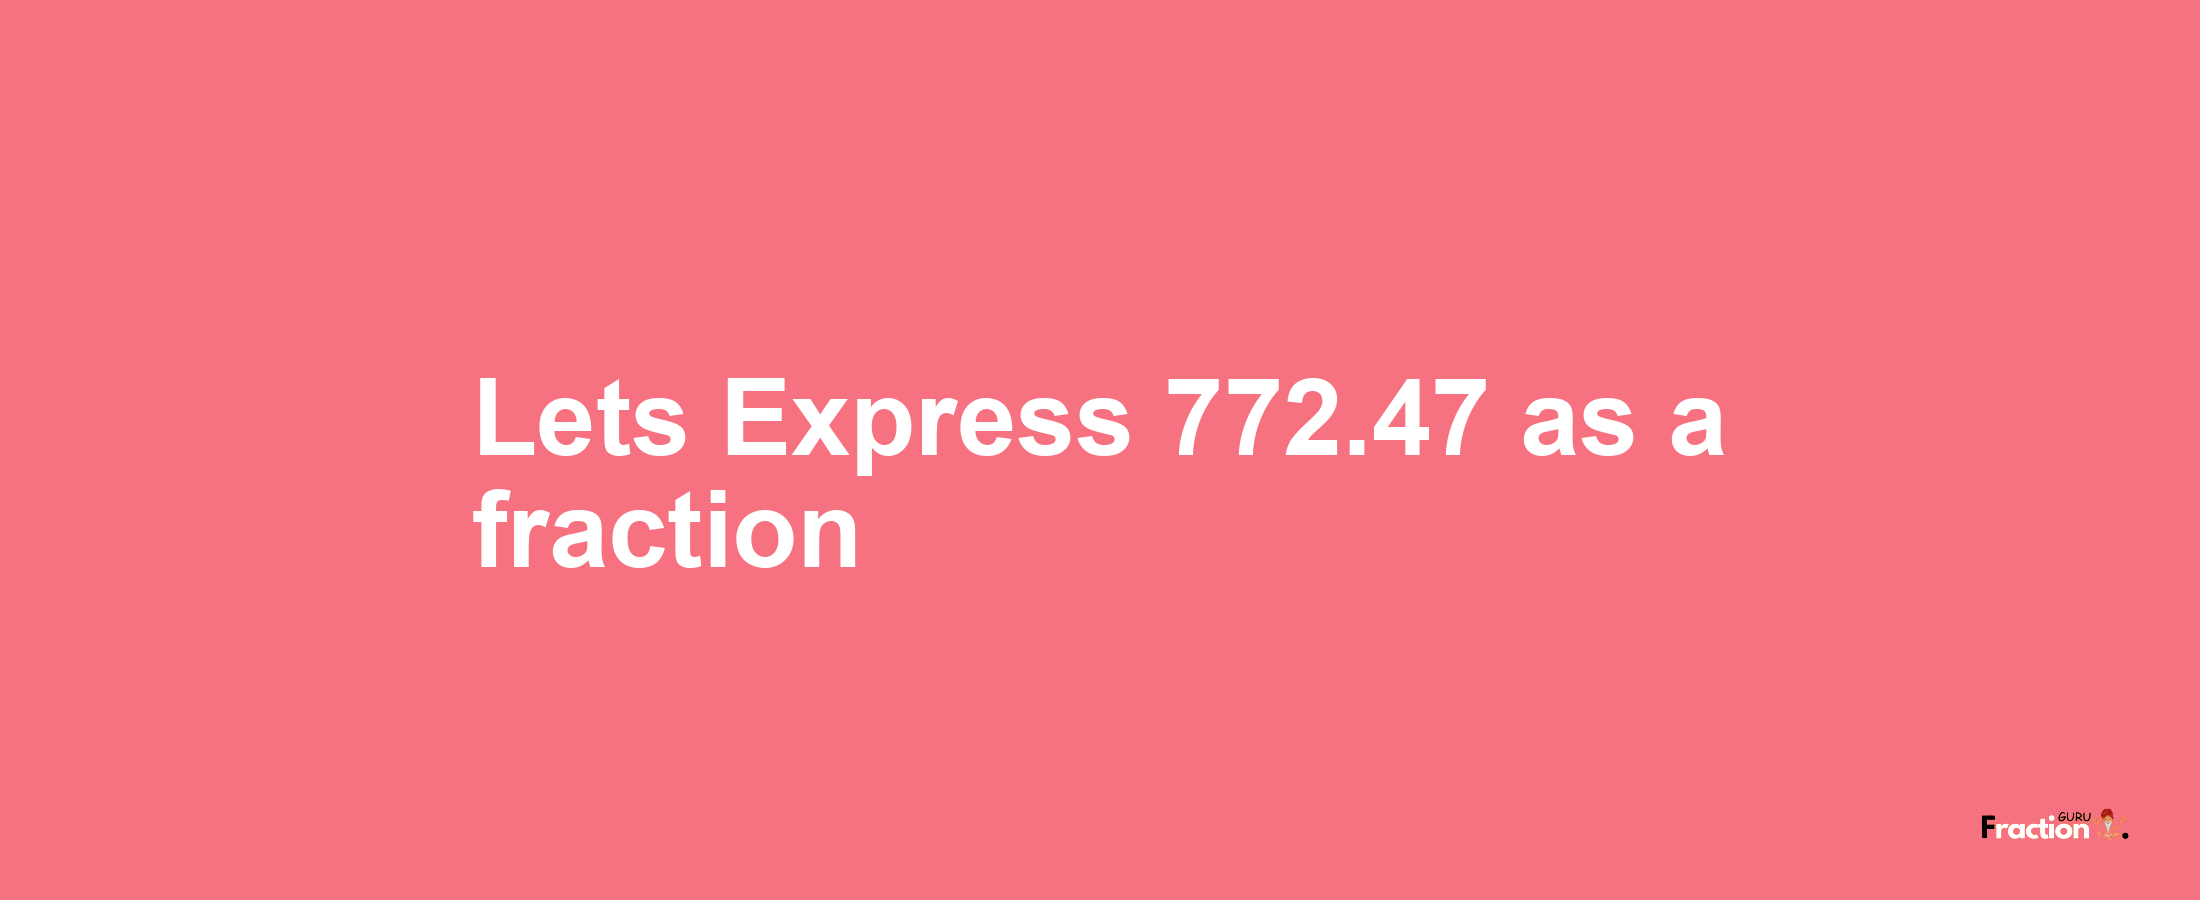 Lets Express 772.47 as afraction